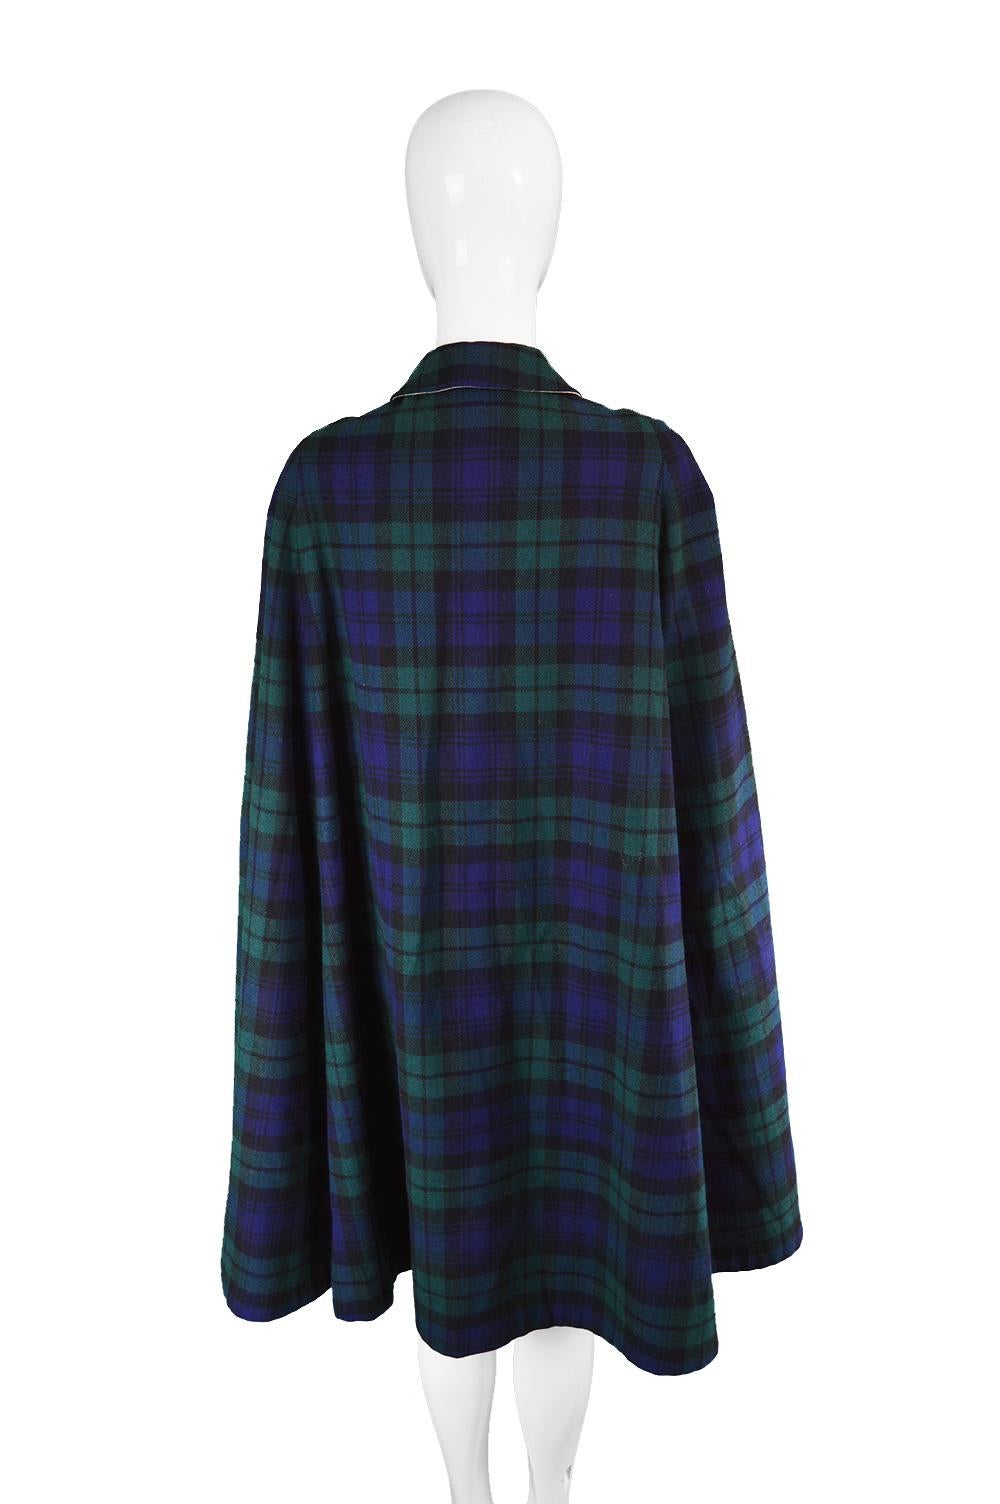 Black Burberry Vintage 1960s Blue & Green Checked Wool Plaid Cape Coat